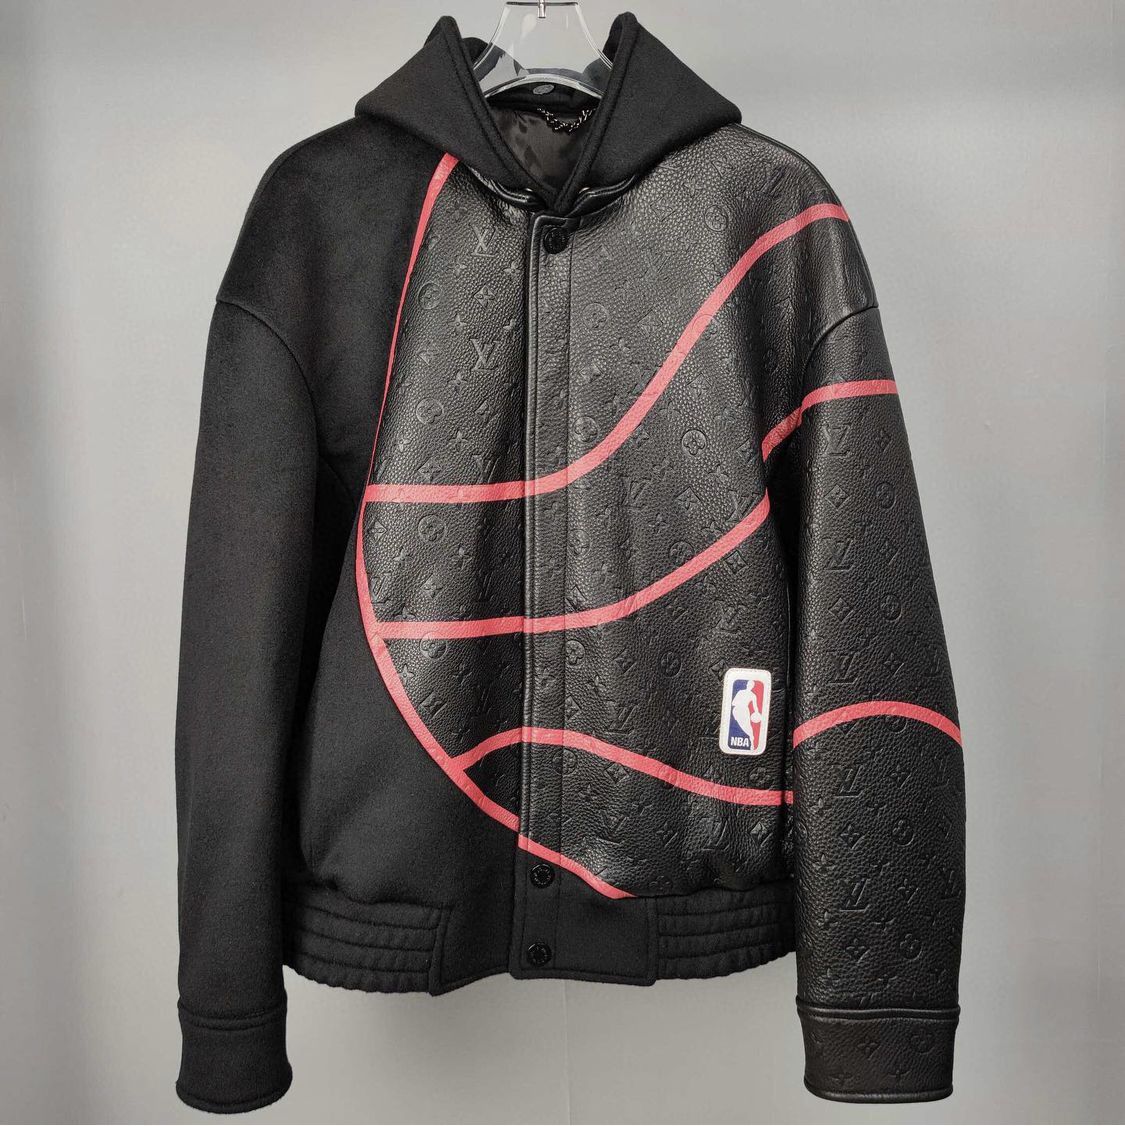 LV X NBA PLAYER LEATHER MIX JACKET SIZE XL for Sale in Lacey, WA